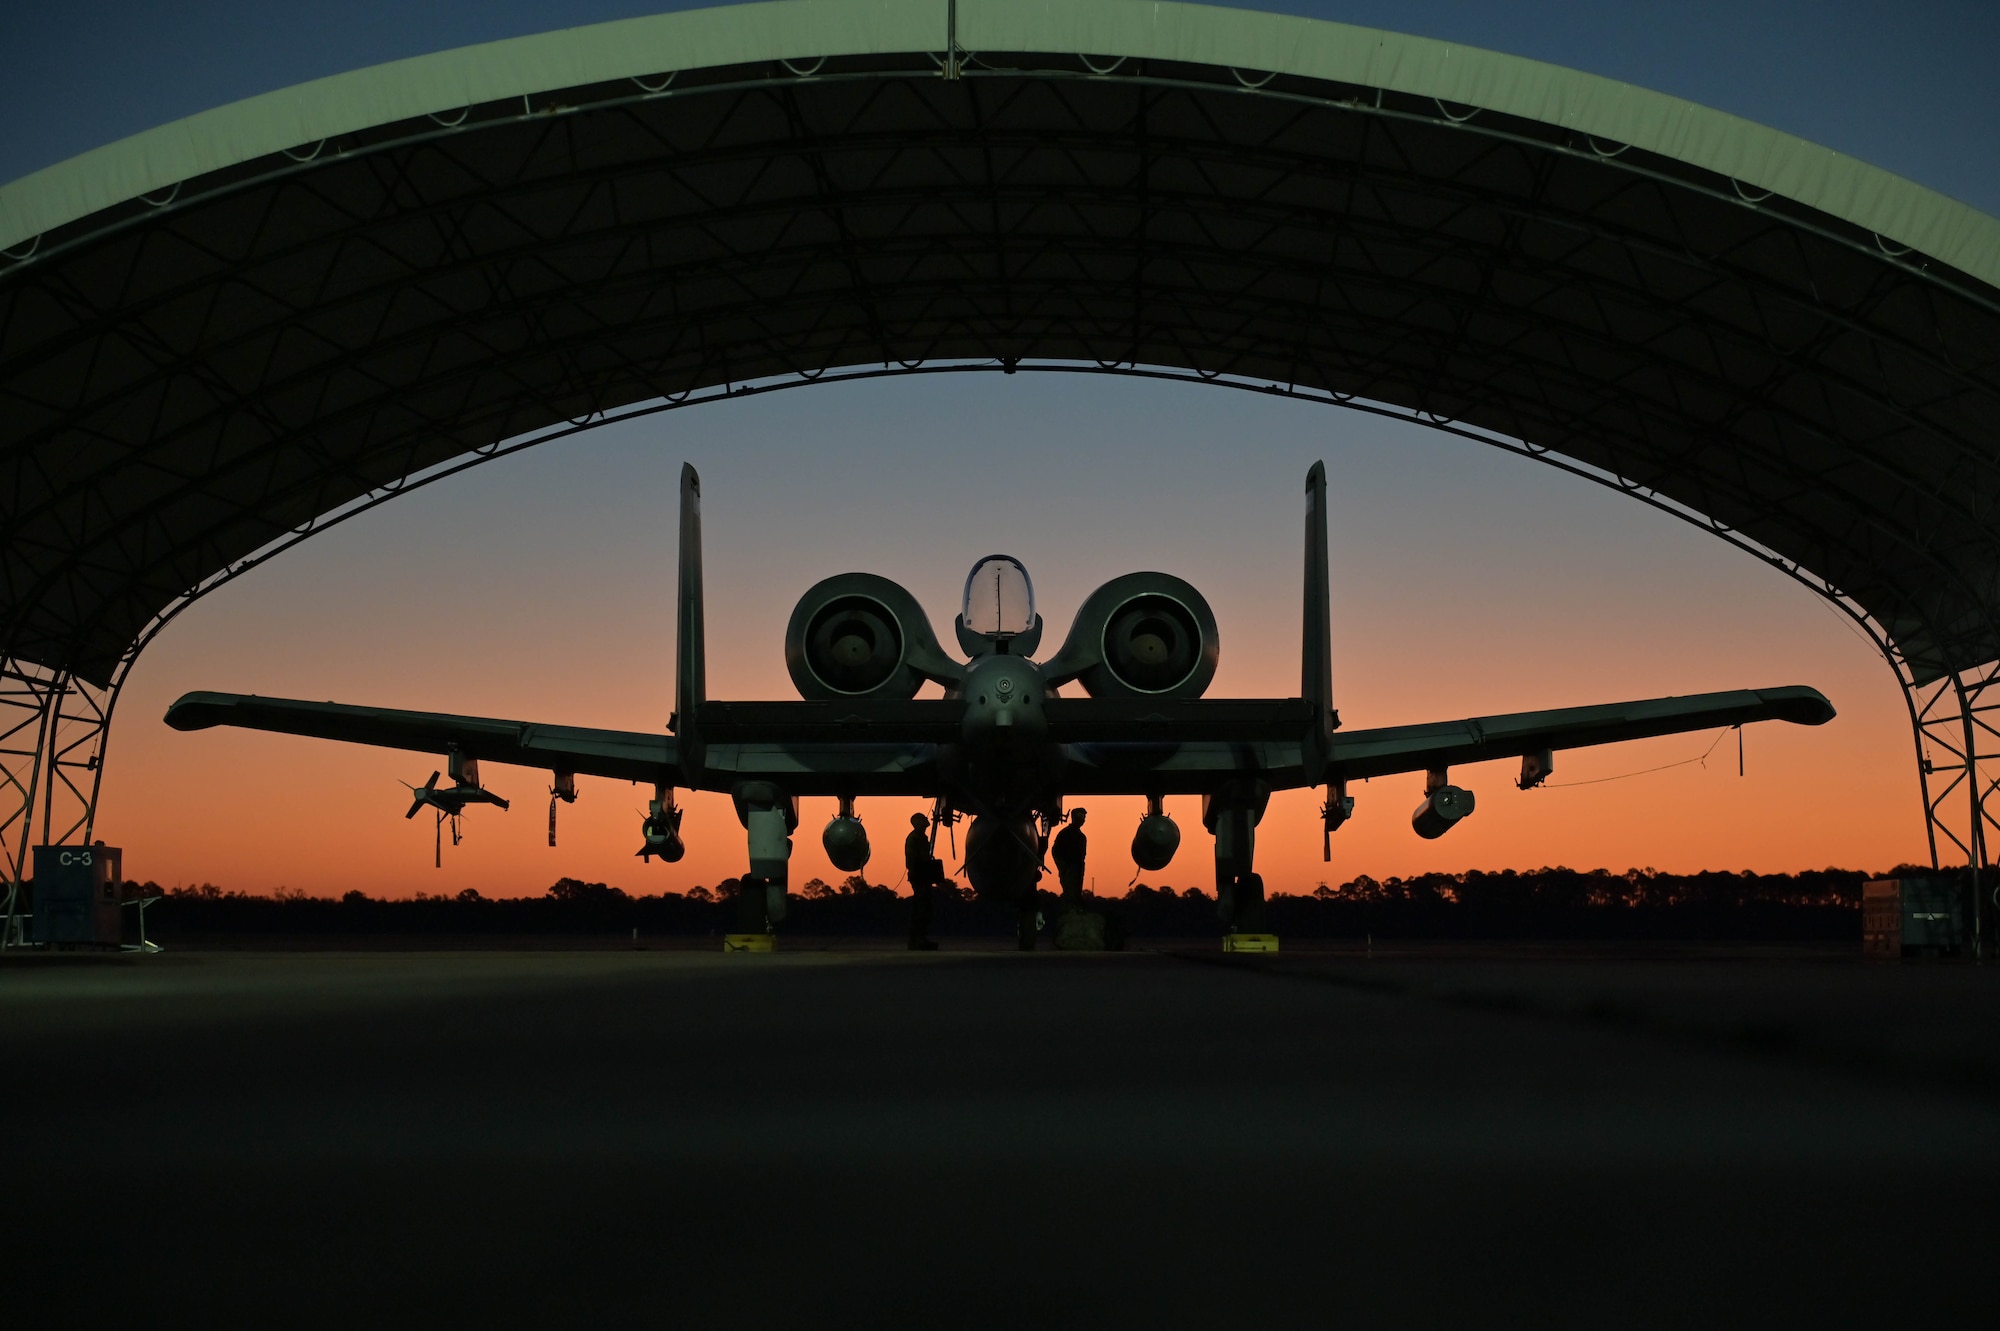 U.S. Air Force Airmen assigned to the 74th Fighter Generation Squadron prepare an A-10C Thunderbolt II aircraft for flight at Moody Air Force Base, Georgia, Oct. 16, 2022.The 23rd Wing deployed A-10C Thunderbolt II aircraft and support personnel to Andersen Air Force Base, Guam for a routine Dynamic Force Employment Operation. (U.S. Air Force photo by Senior Airman Rebeckah Medeiros)